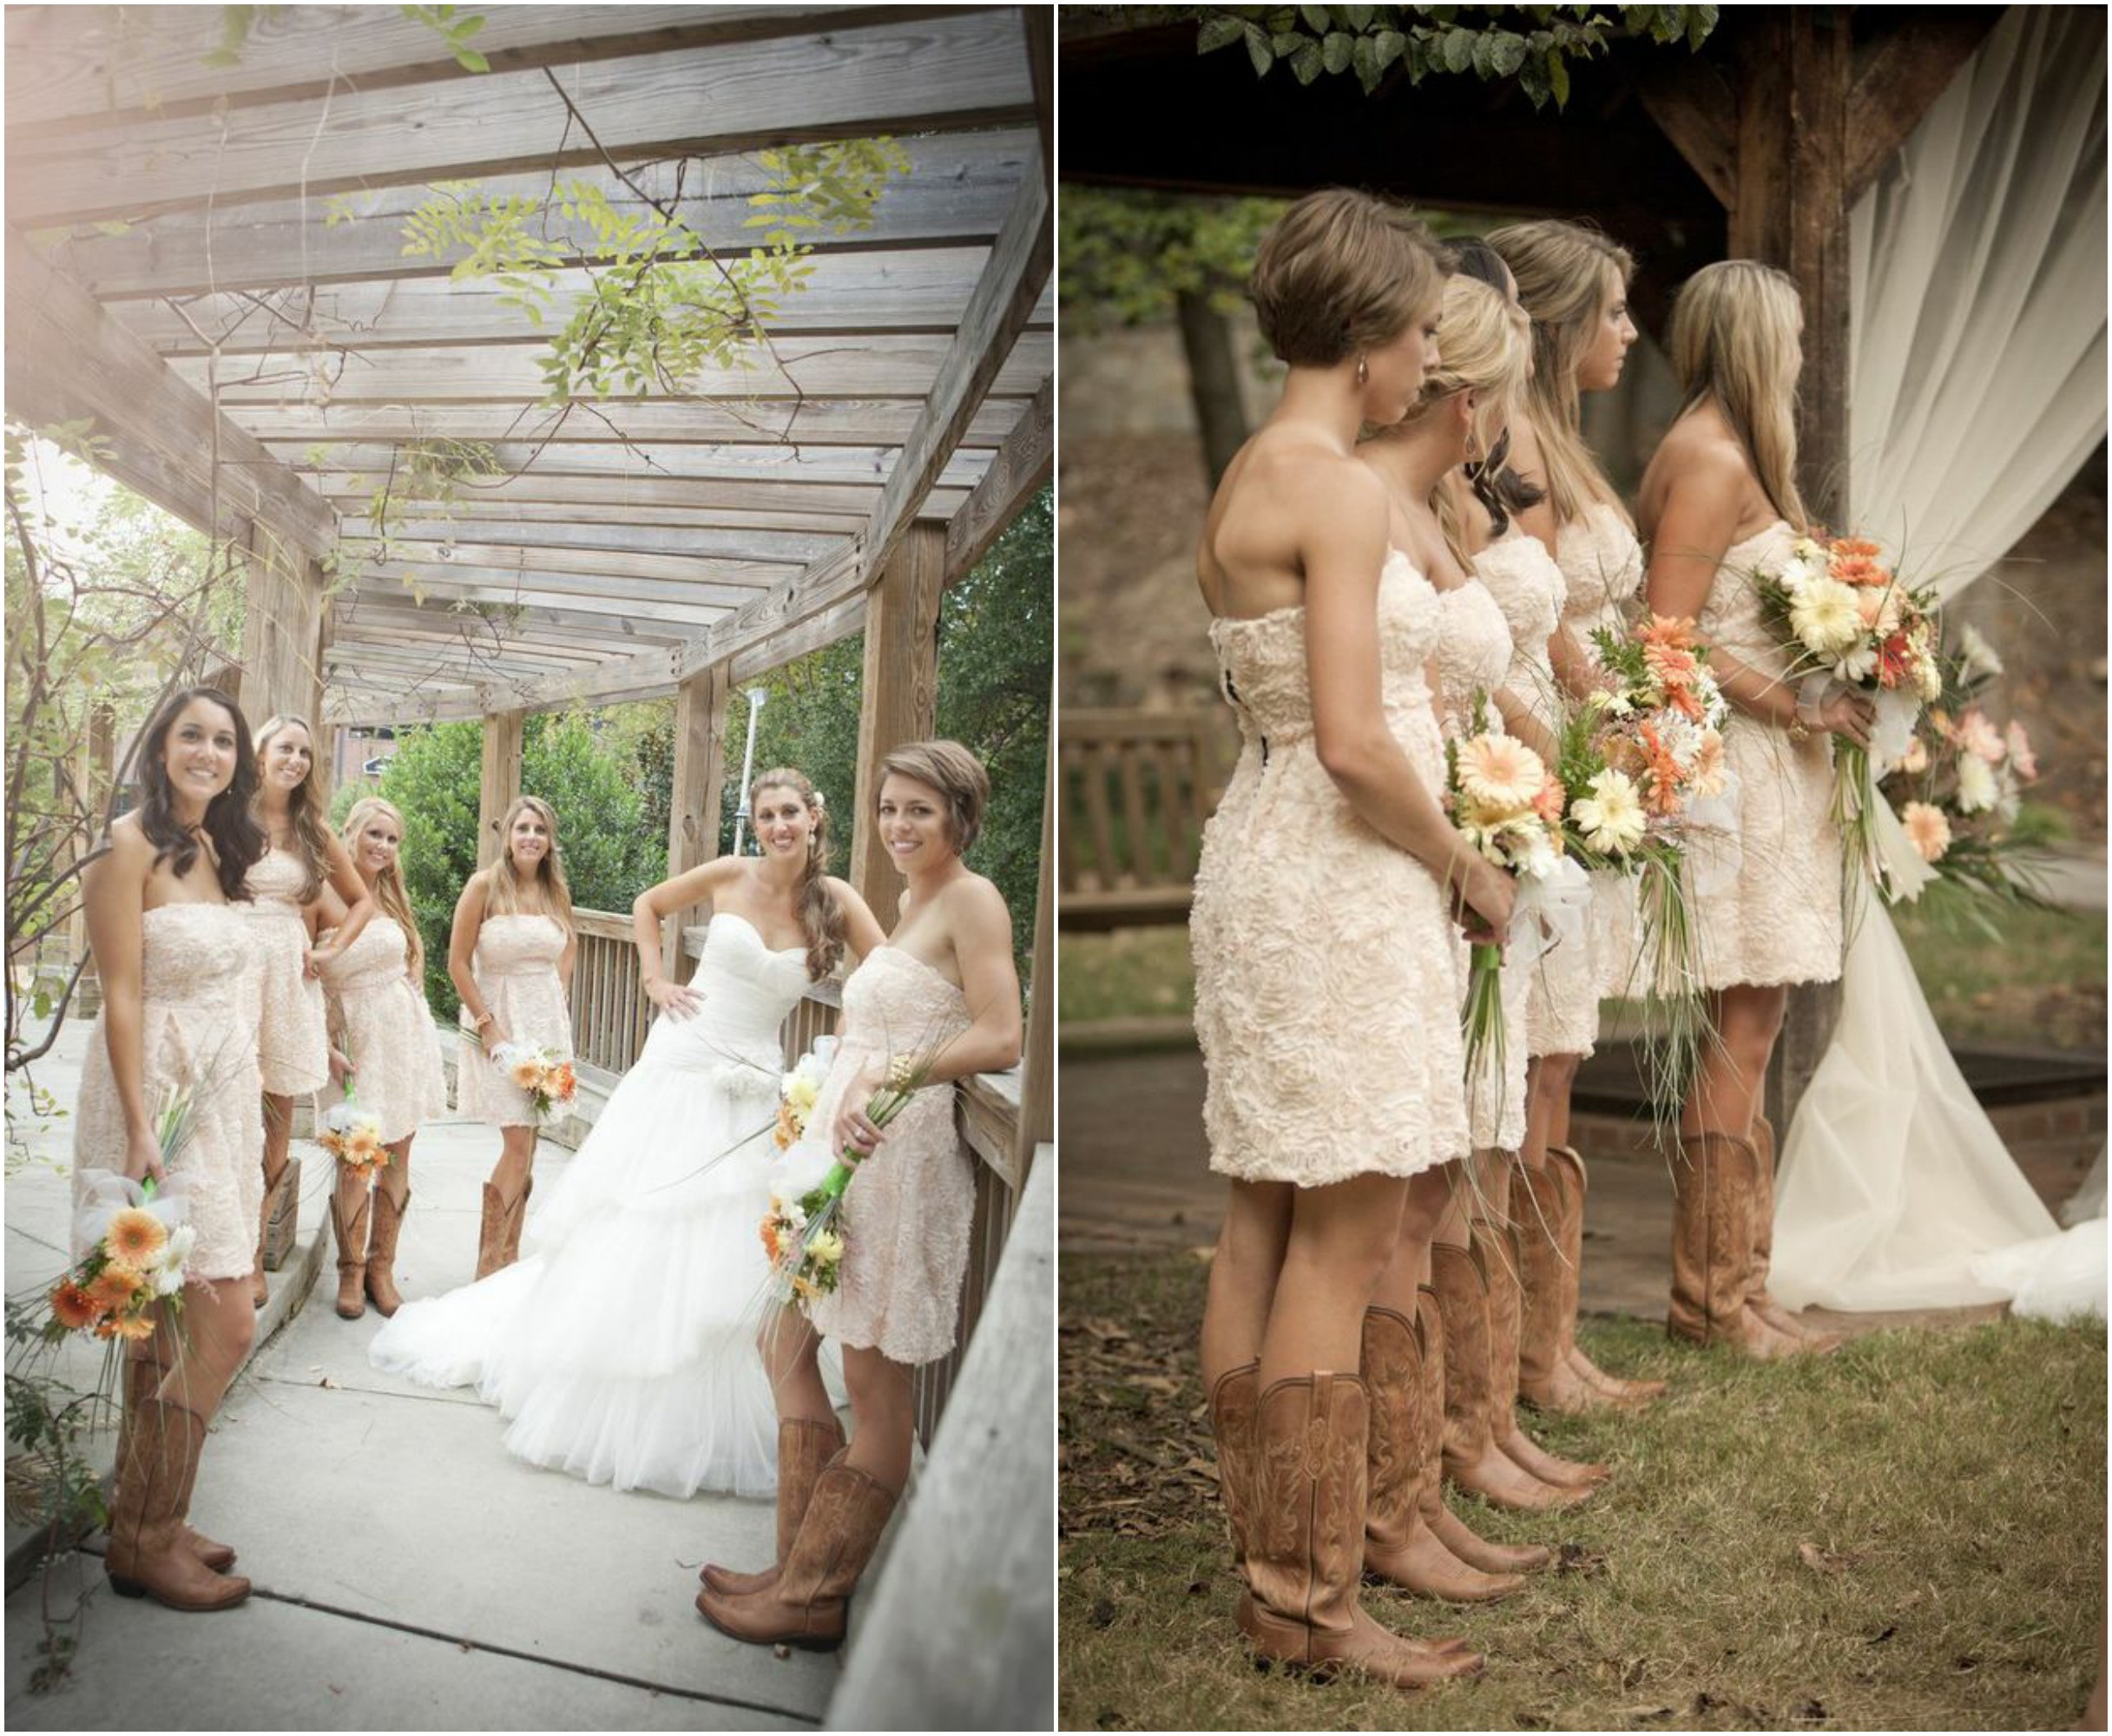 Wedding Dresses With Cowboy Boots
 Rustic Wedding With Bridesmaids In Cowboy Boots Rustic